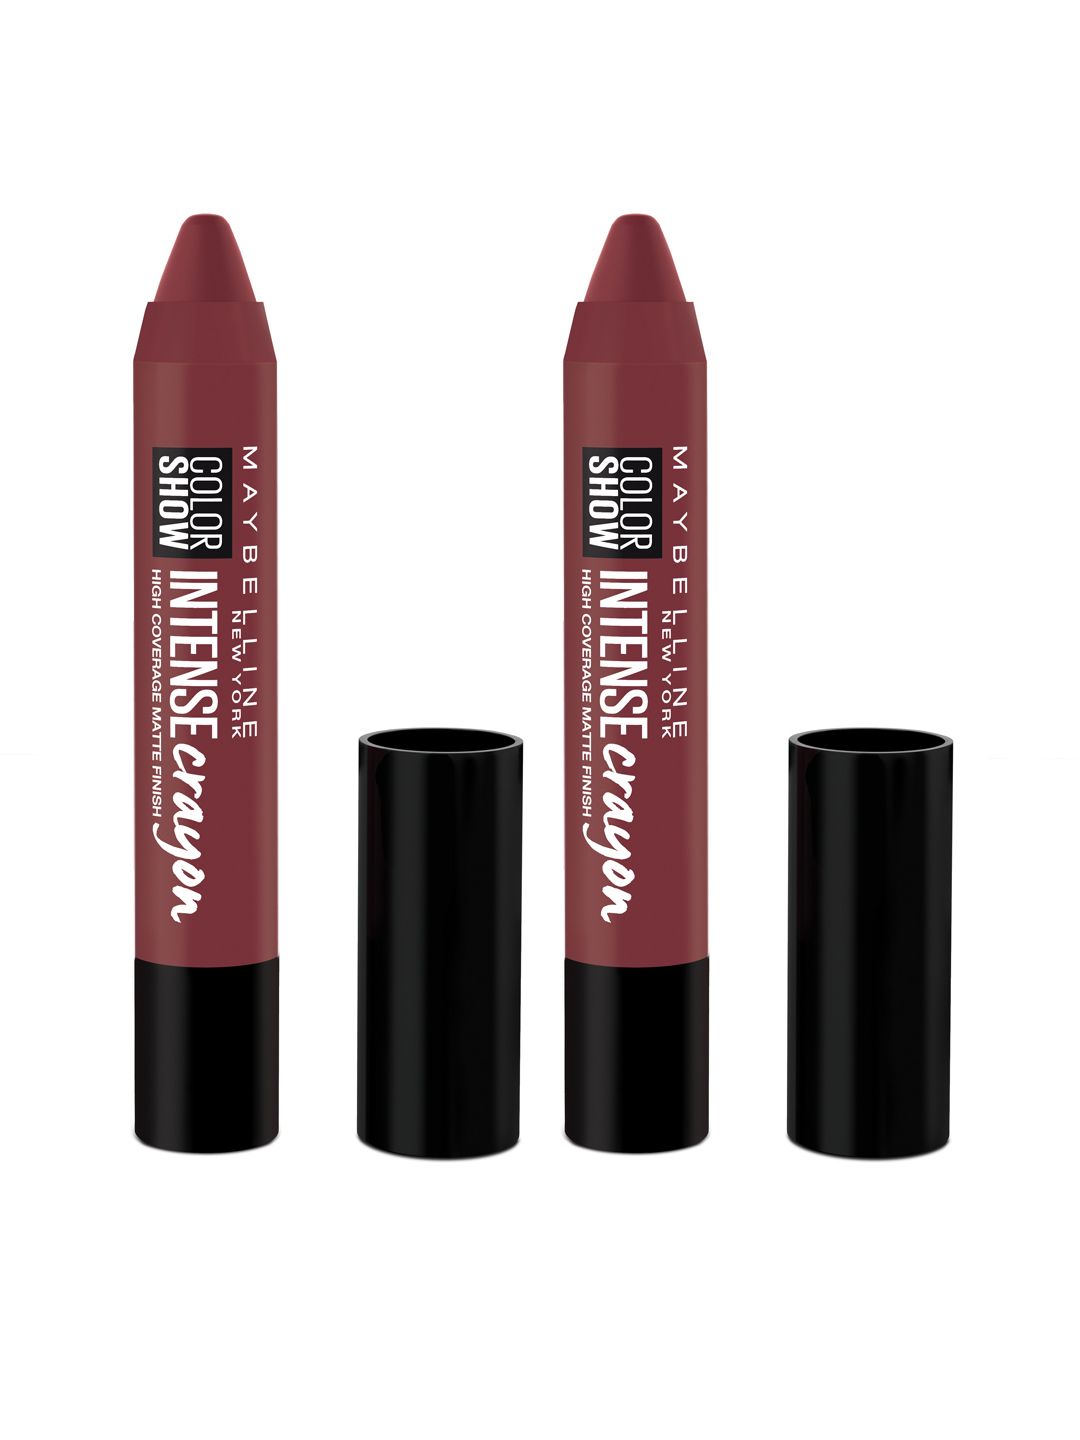 Maybelline Pack of 2 Color Show Intense Crayon Bold Burgundy M 406 Lipstick Price in India